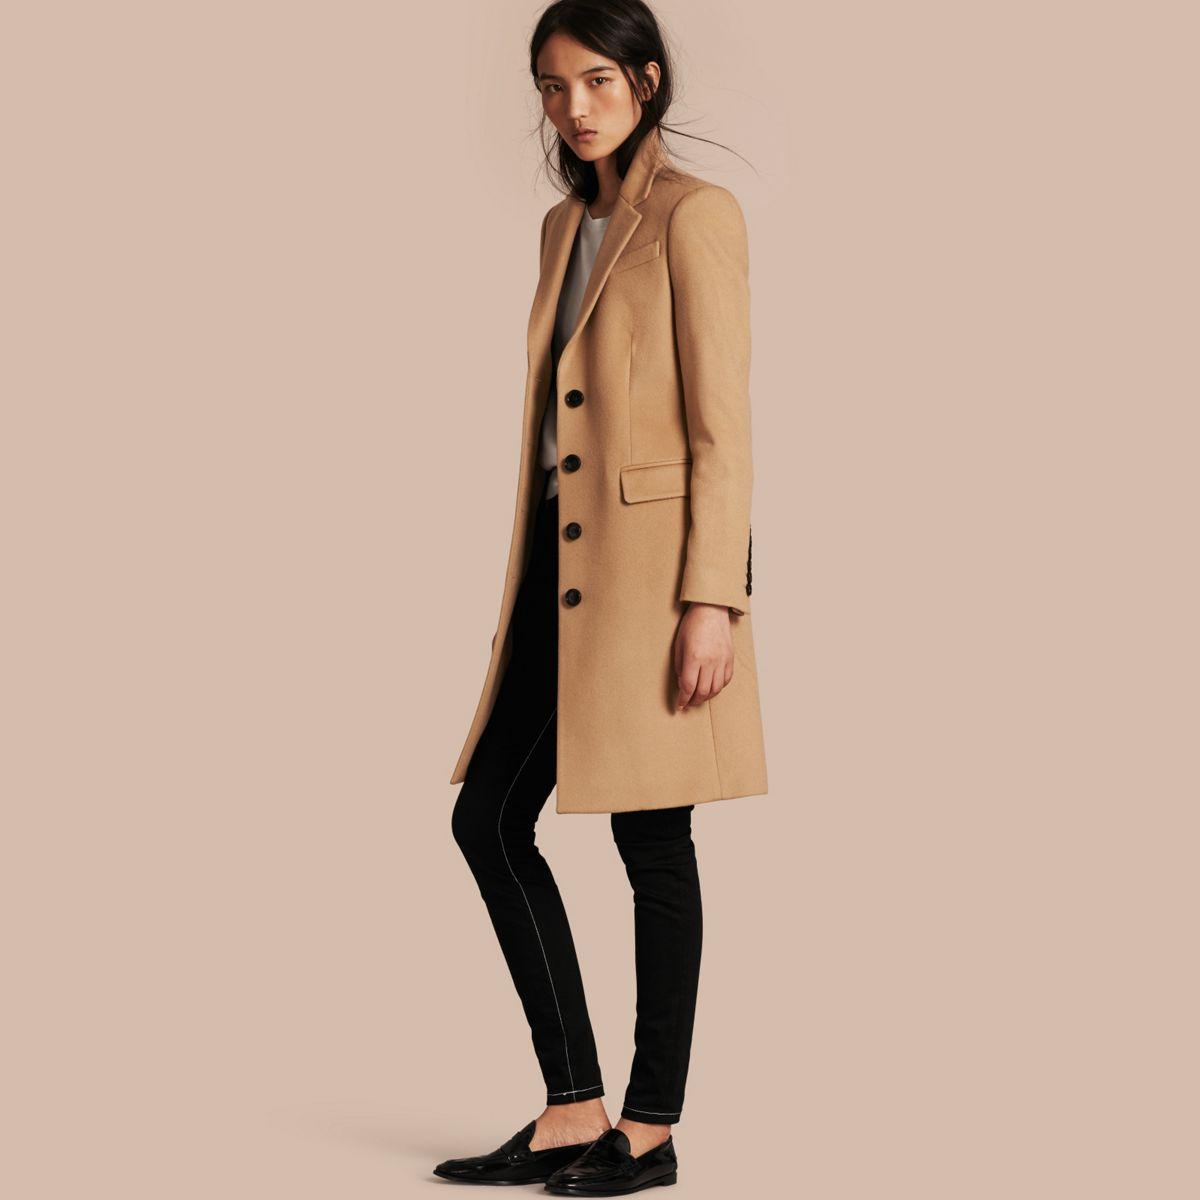 Burberry Tailored Wool Cashmere Coat in Camel (Natural) | Lyst